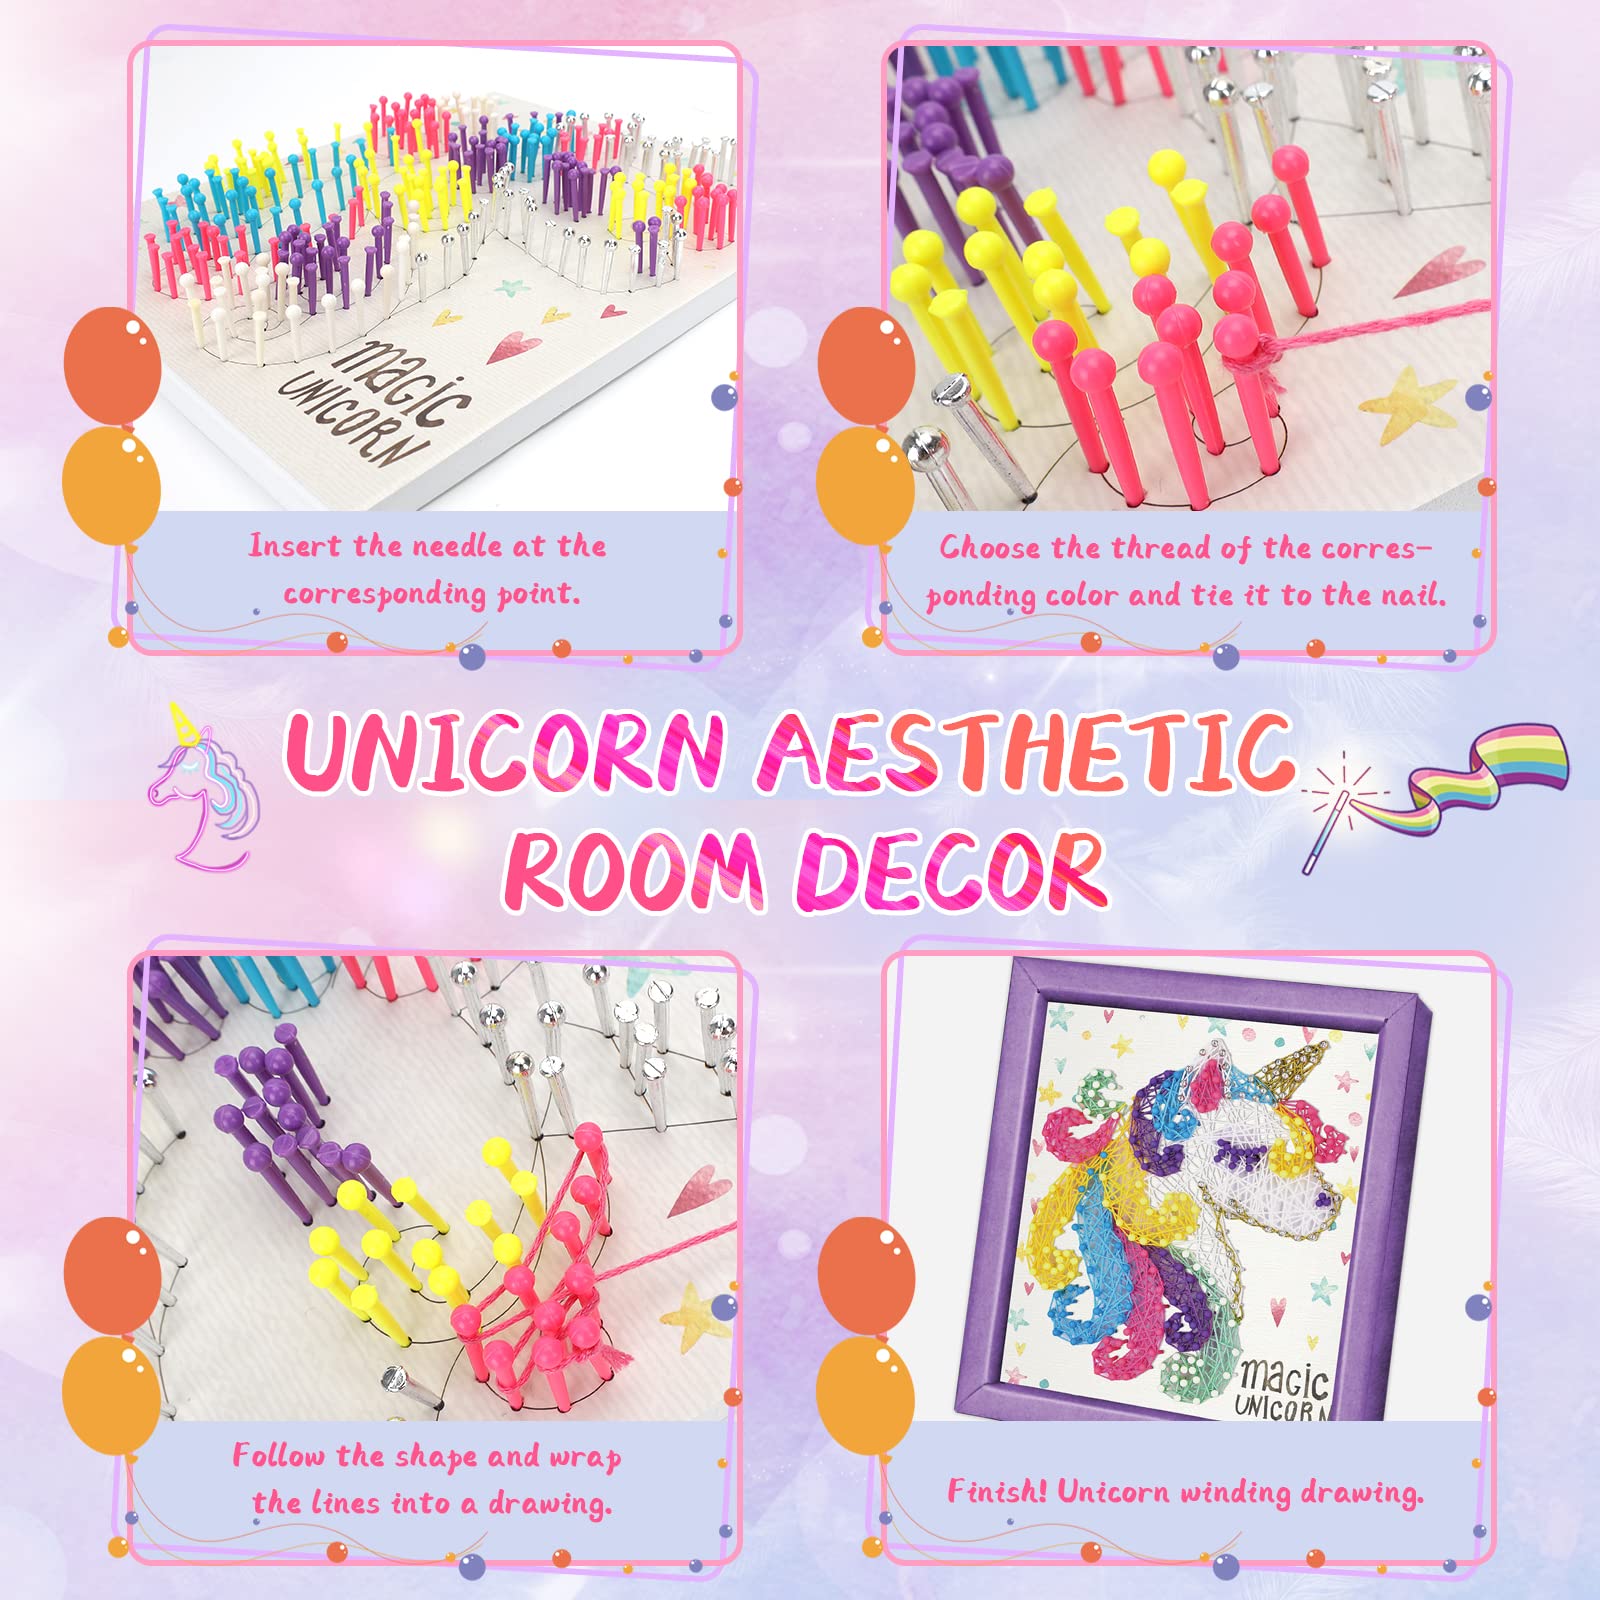 Pearoft Gifts for Kids Girls 8 9 10 11 12 Year Old, Unicorn Crafts Toys for Teens Girl Age 5 6 7 Kid Birthday Presents Art Craft Night Light Kits for